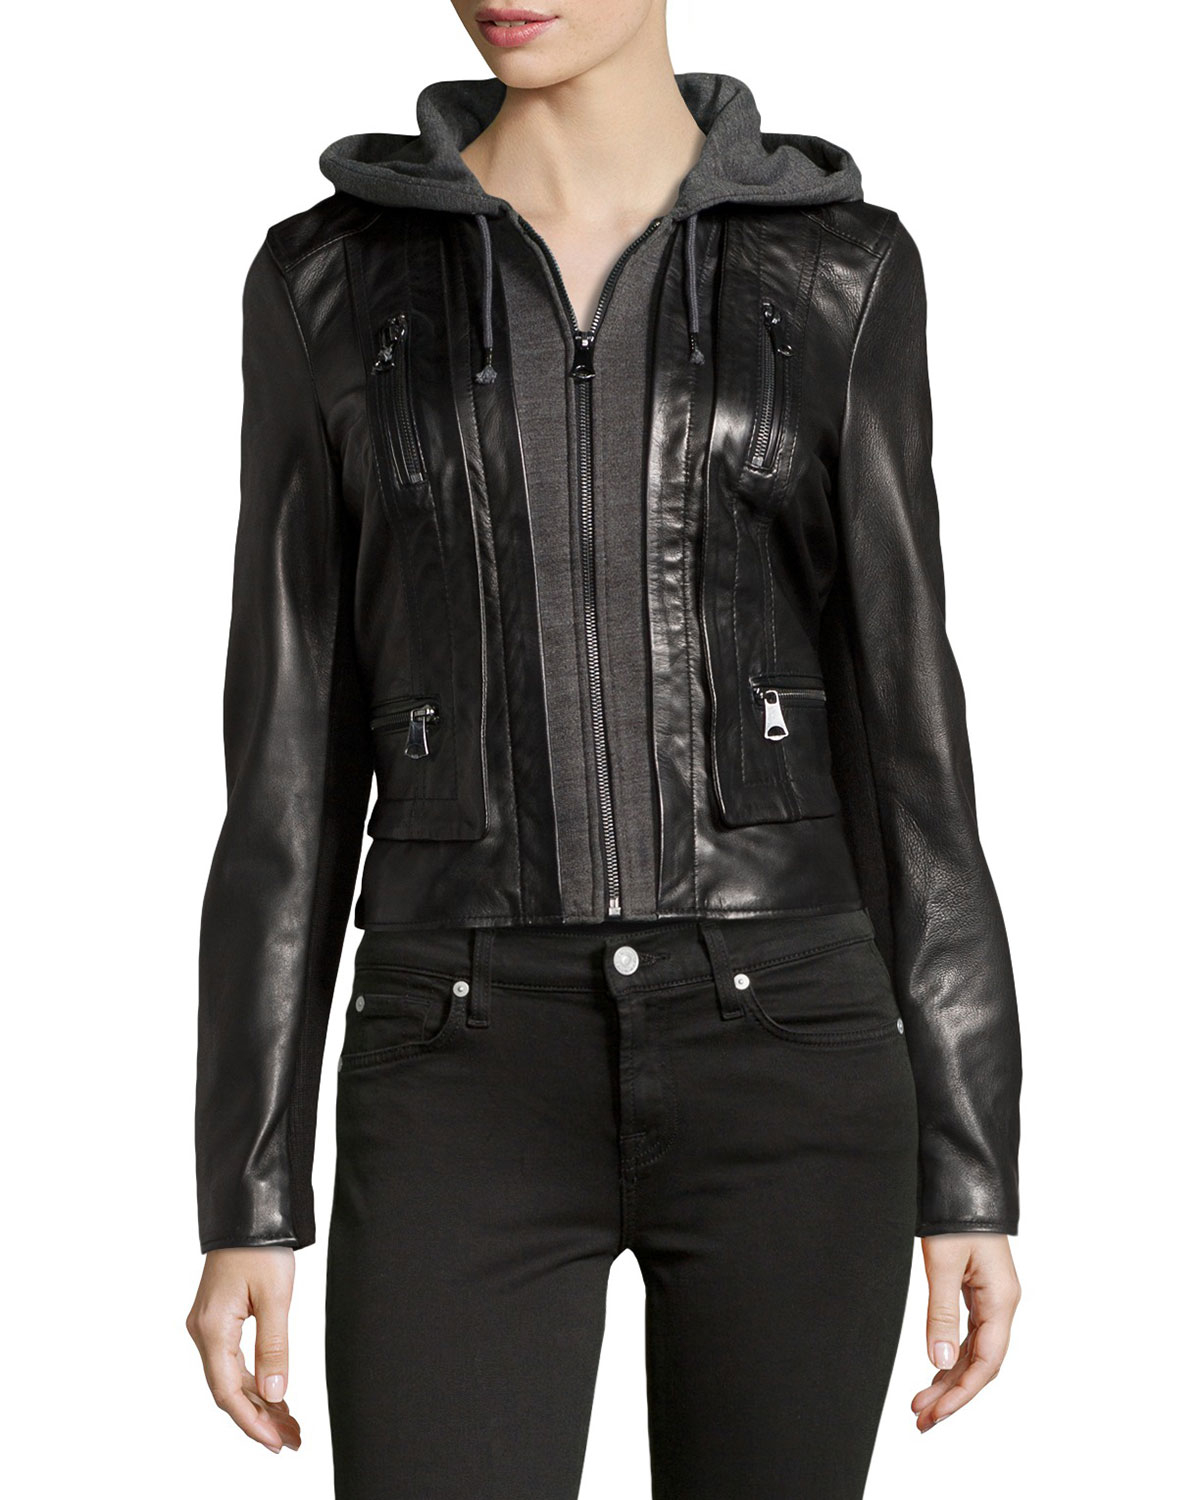 Lyst - Marc new york Mila Knit-Lined Leather Jacket in Black